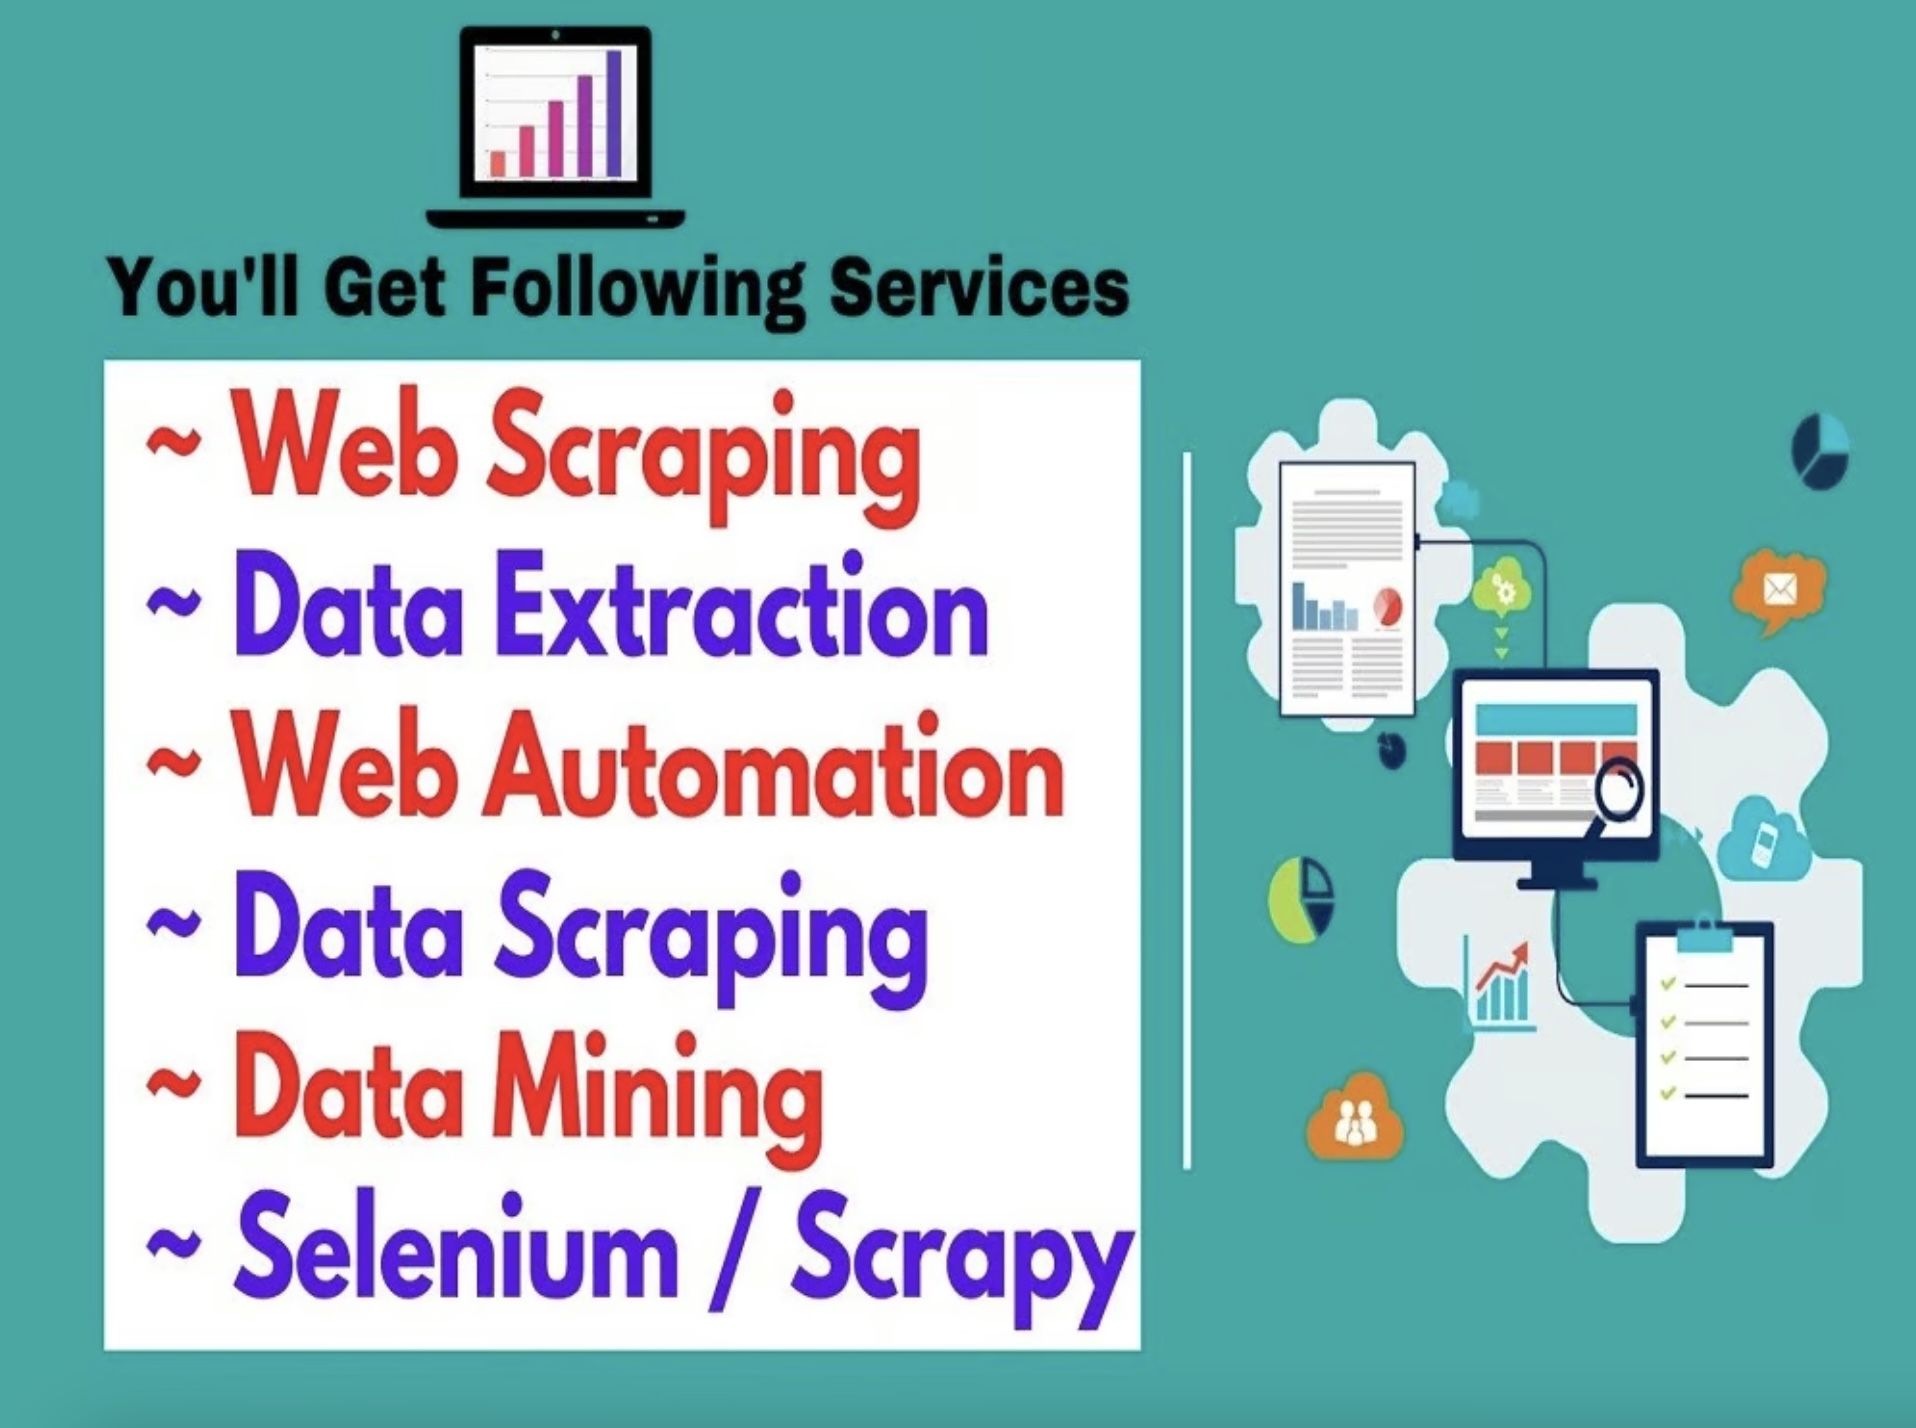 28275Web Scraping, Data Extraction, Data Scraping and Web Automation service